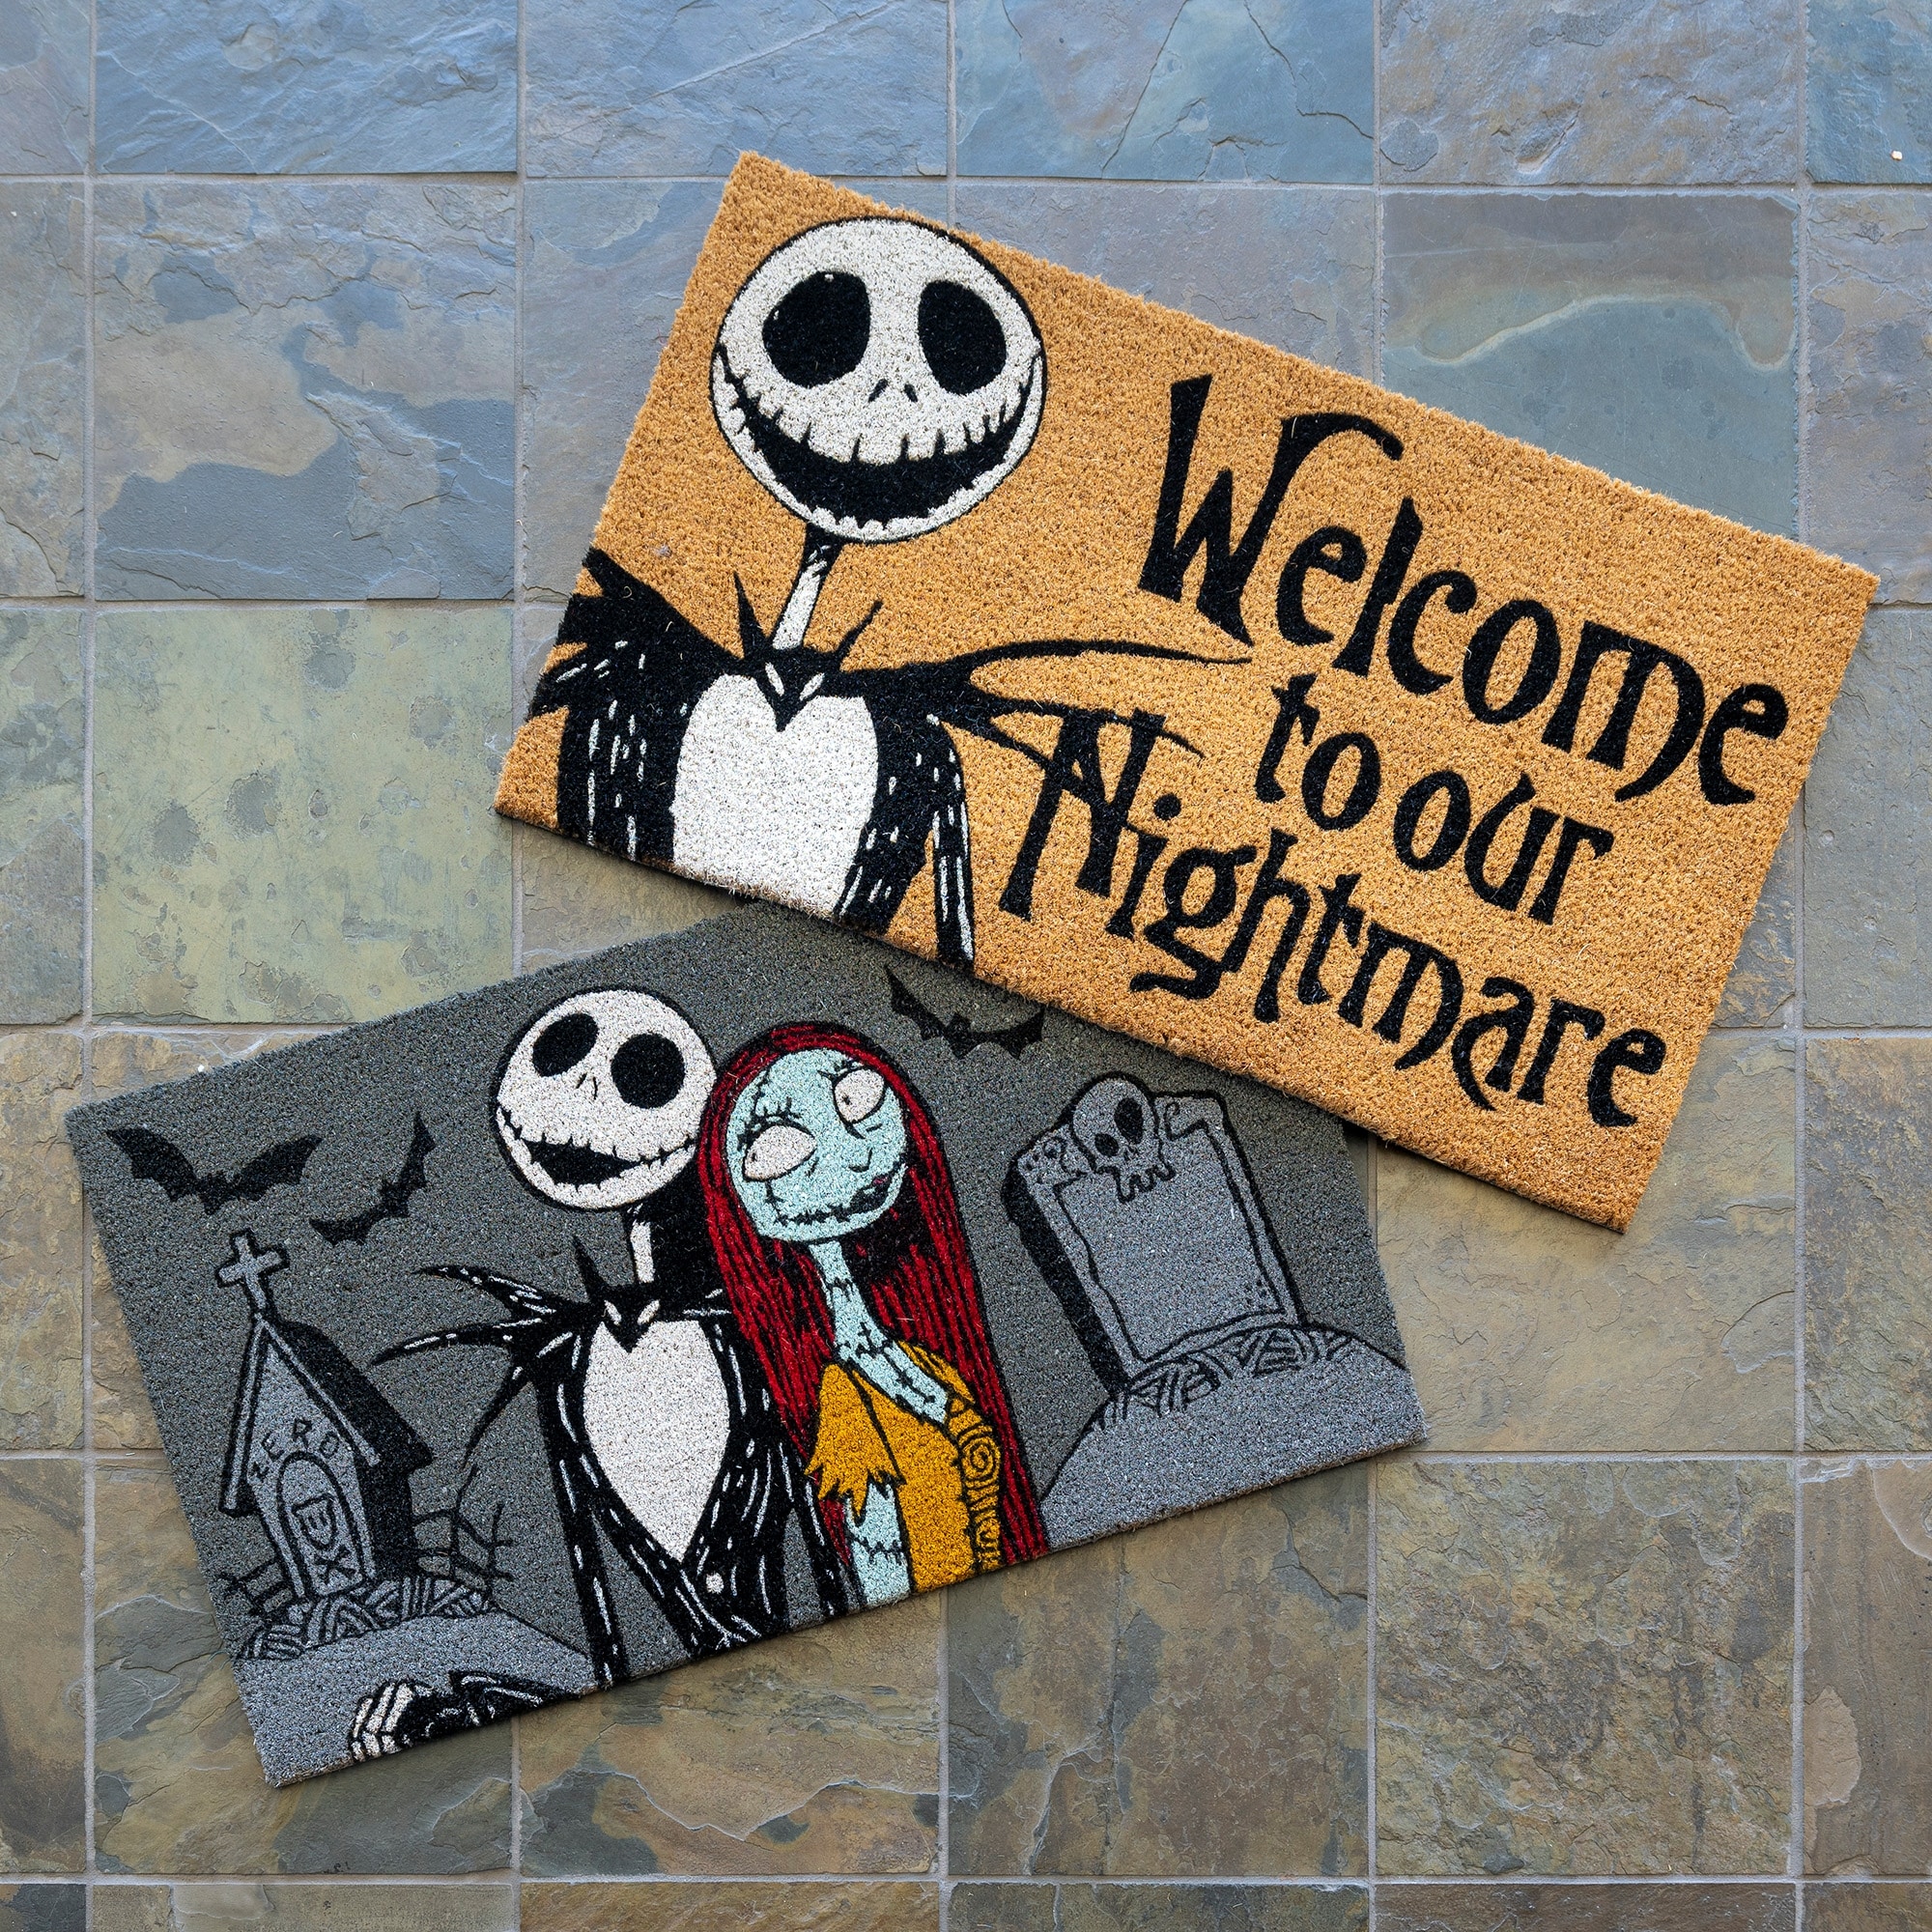 https://ak1.ostkcdn.com/images/products/is/images/direct/4f09c8ca72c6831ecdcf45054be255ca8618f586/Licensed-Disney-Nightmare-Before-Christmas-Jack-and-Sally-Door-Mats%2C-2PK.jpg